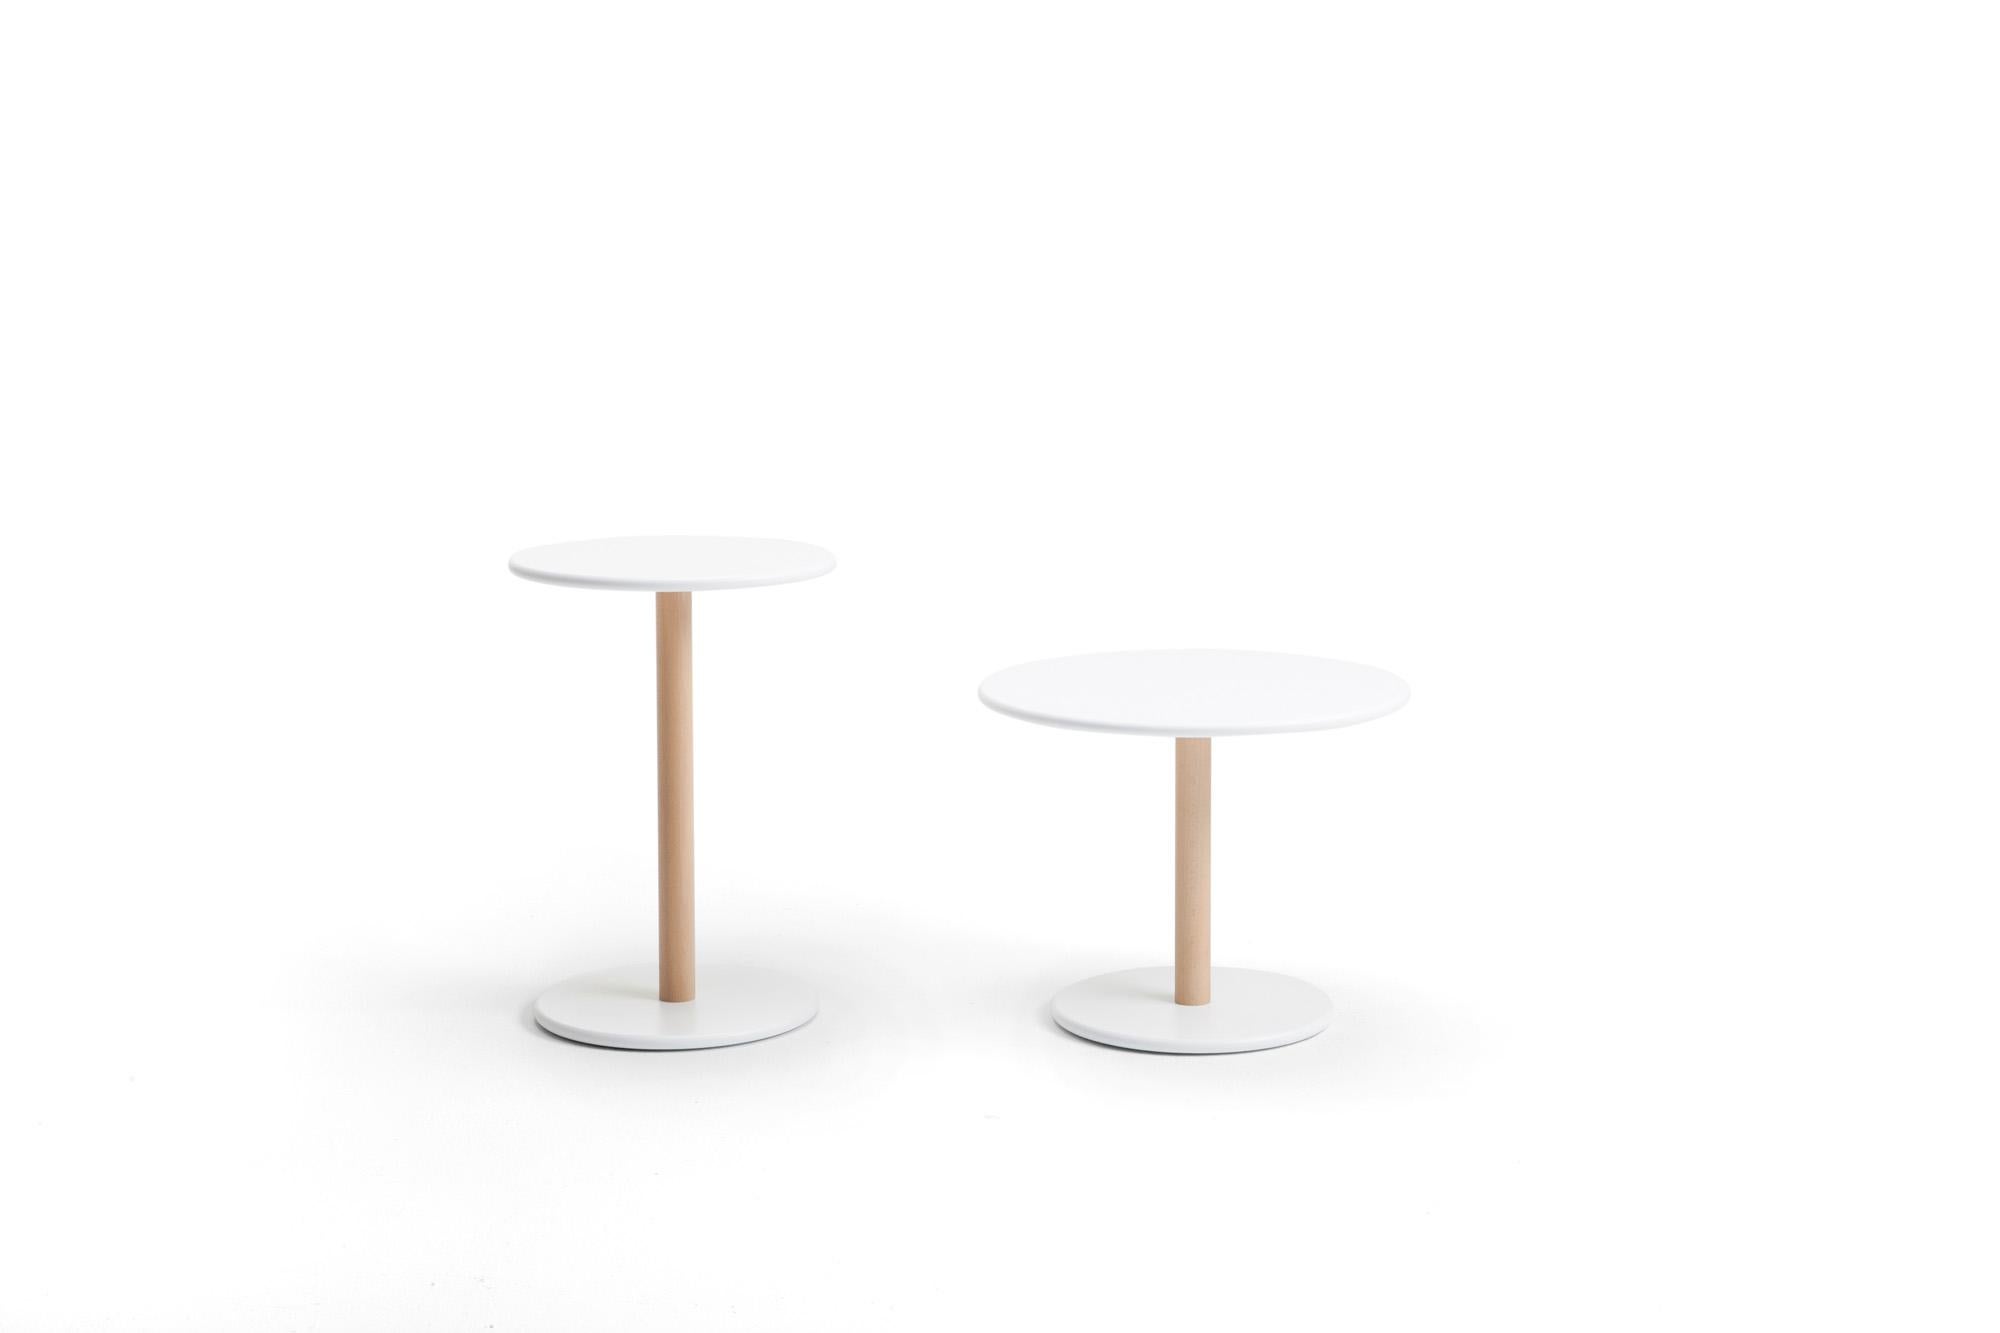 Low tables for home and commercial establishments inspired by the Japanese classics and designed by Naoto Fukasawa for Viccarbe. 

Two different sizes make them very flexible and suitable for a variety of uses.

Constructed with a natural beech